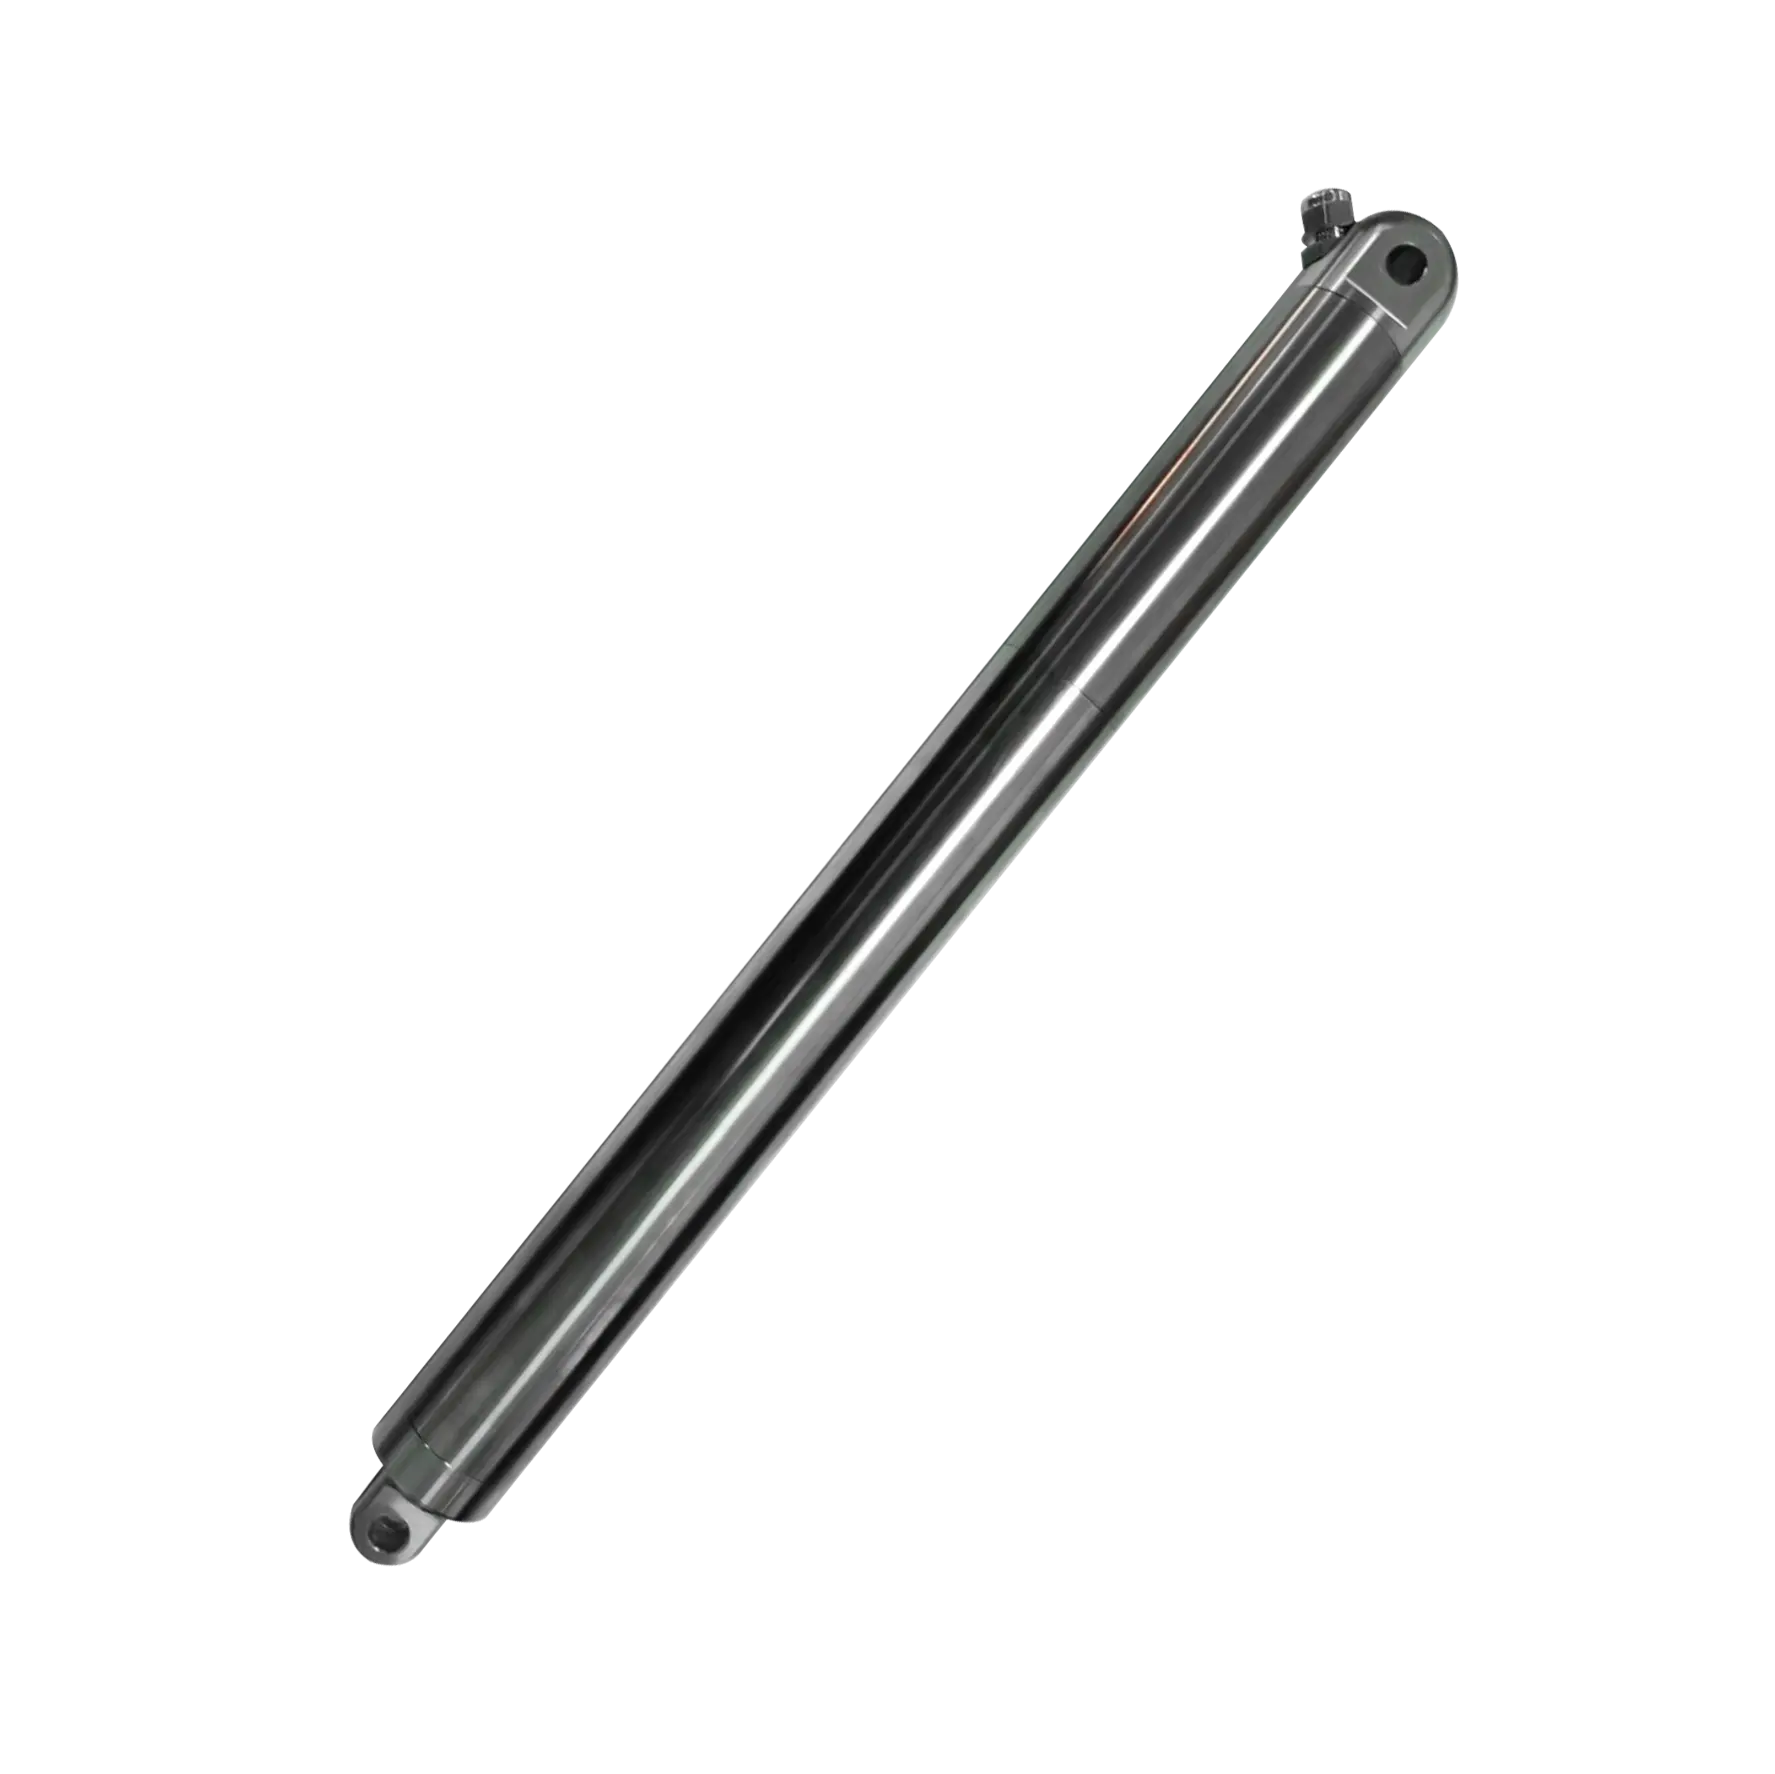 Motor Tubular Electric Linear Actuators 230kg High Waterproof Level IP69K Specifically For Pergolas And Outdoor Use